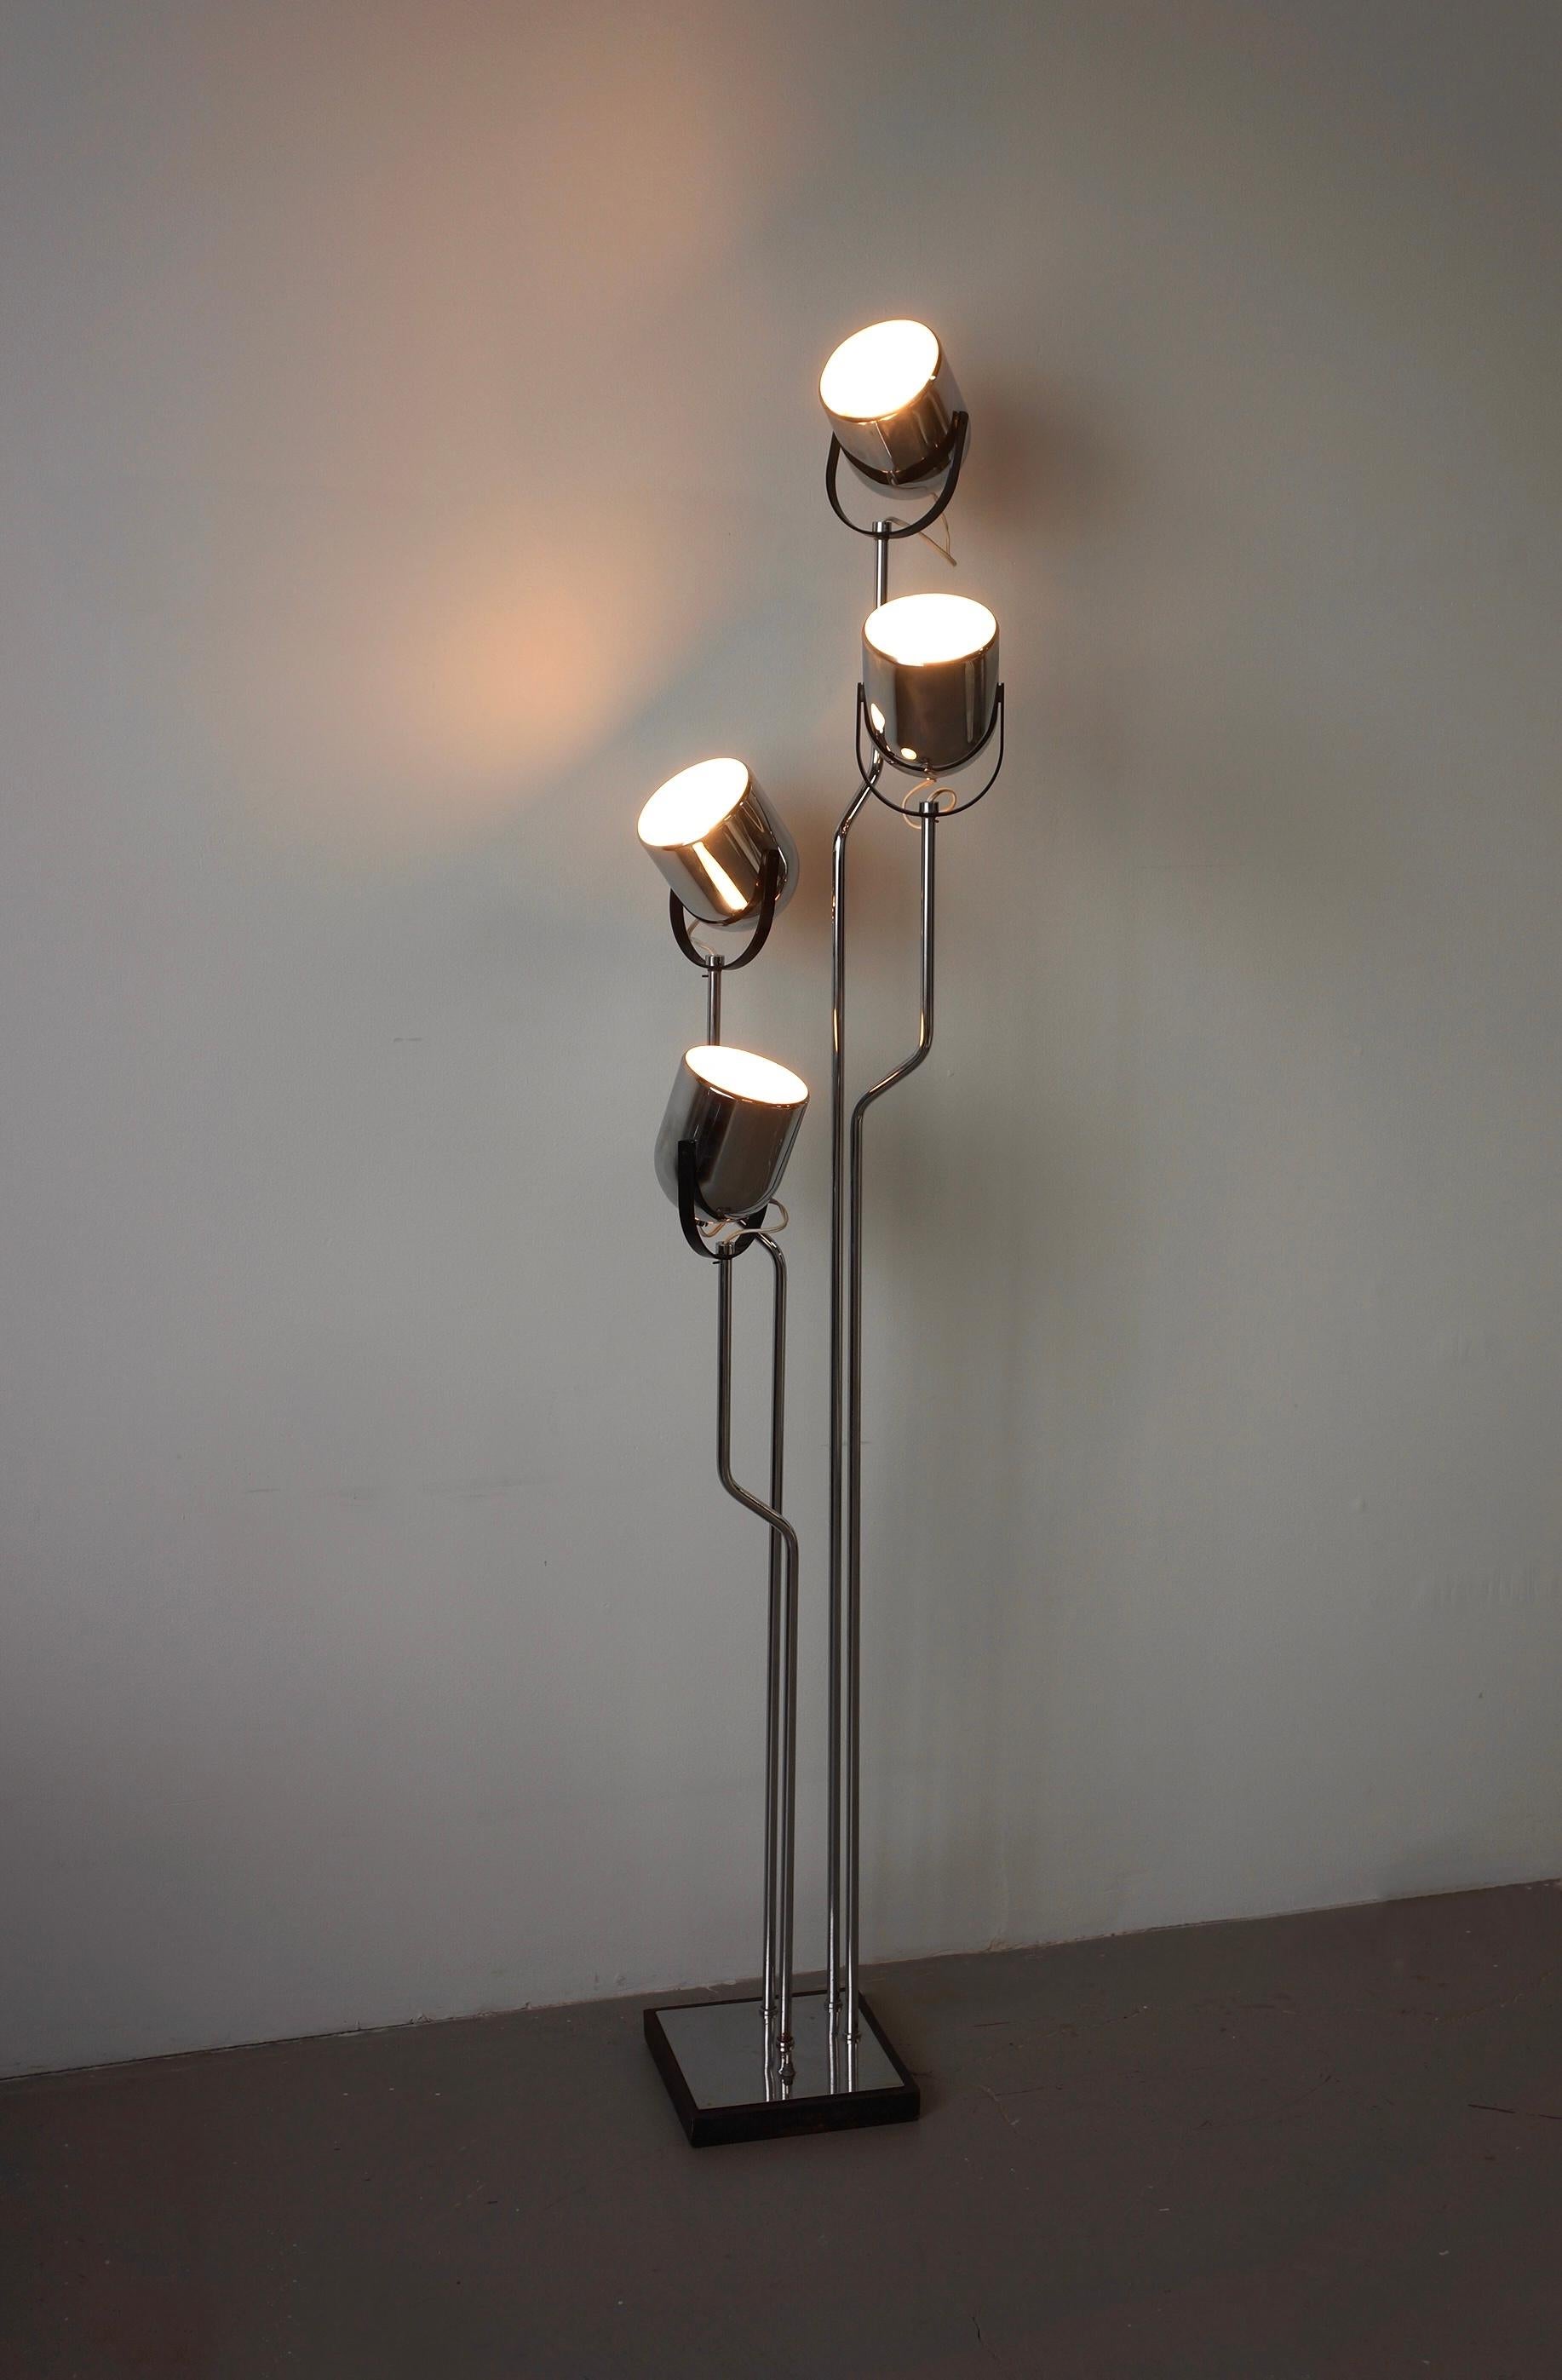 Incredible authentic Goffredo Reggiani for Reggiani floor lamp made in Italy in the 1970s. This stunner features four lights in different heights which are fully adjustable and can be adjusted to the desired position. The different heights of the